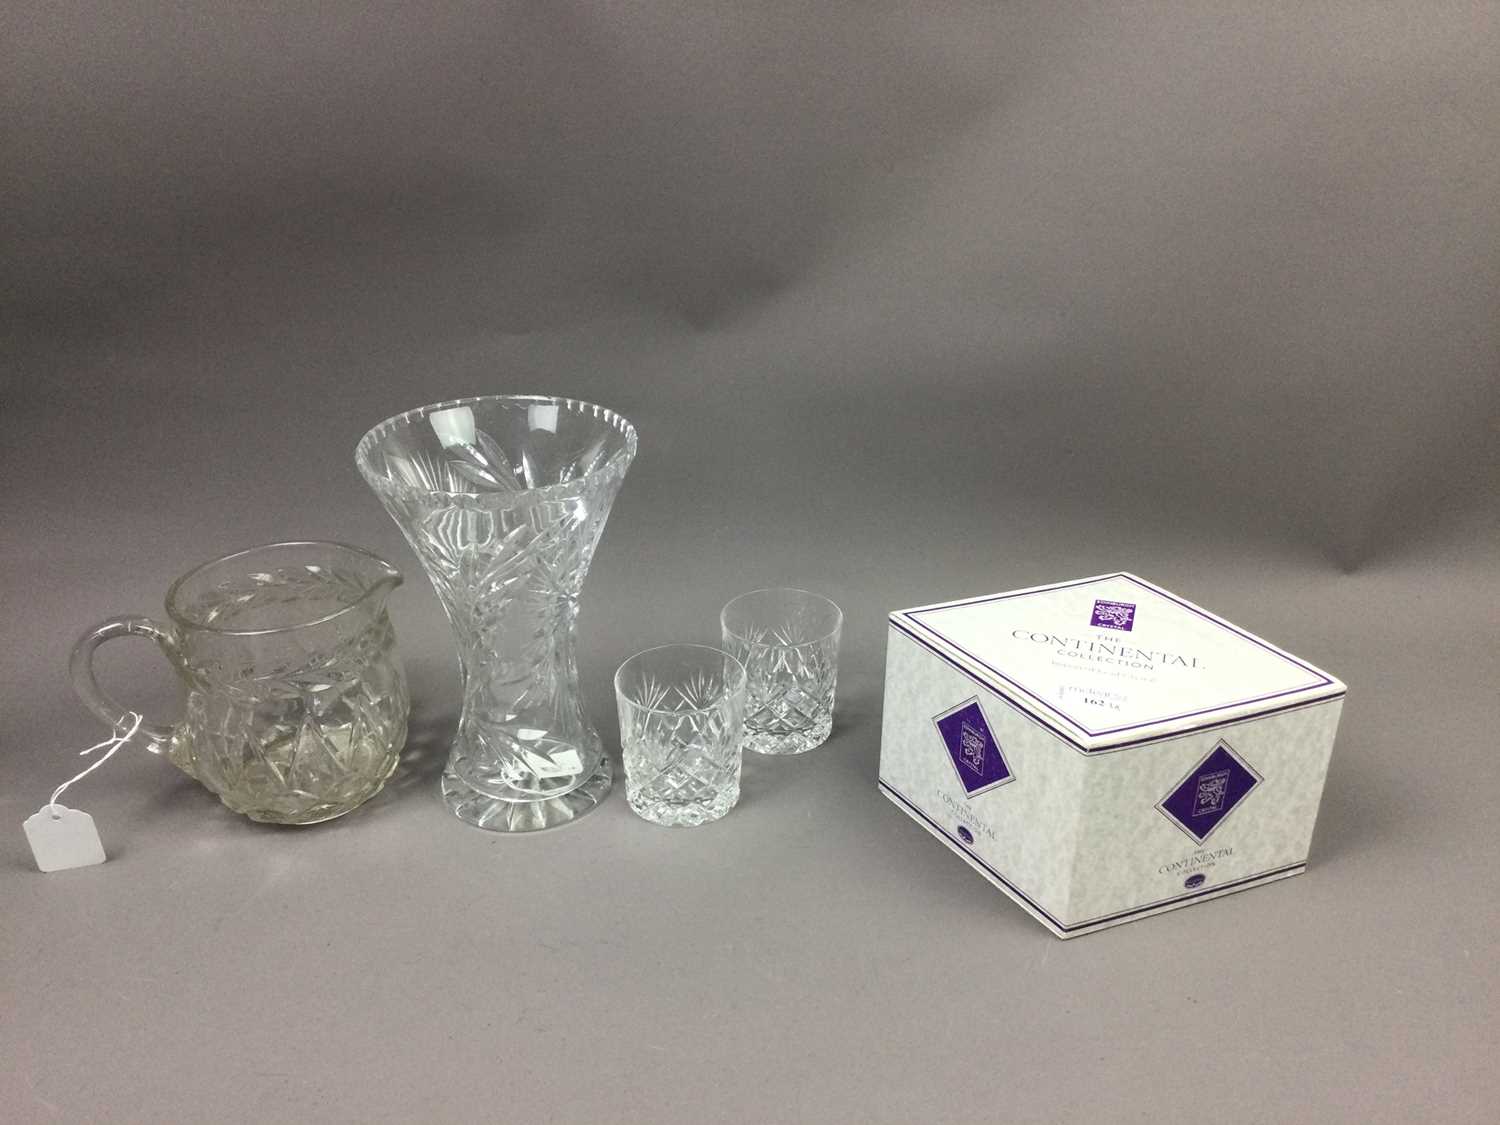 Lot 162 - A LOT OF SIX EDINBURGH CRYSTAL WHISKY GLASSES ALONG WITH OTHER CRYSTAL